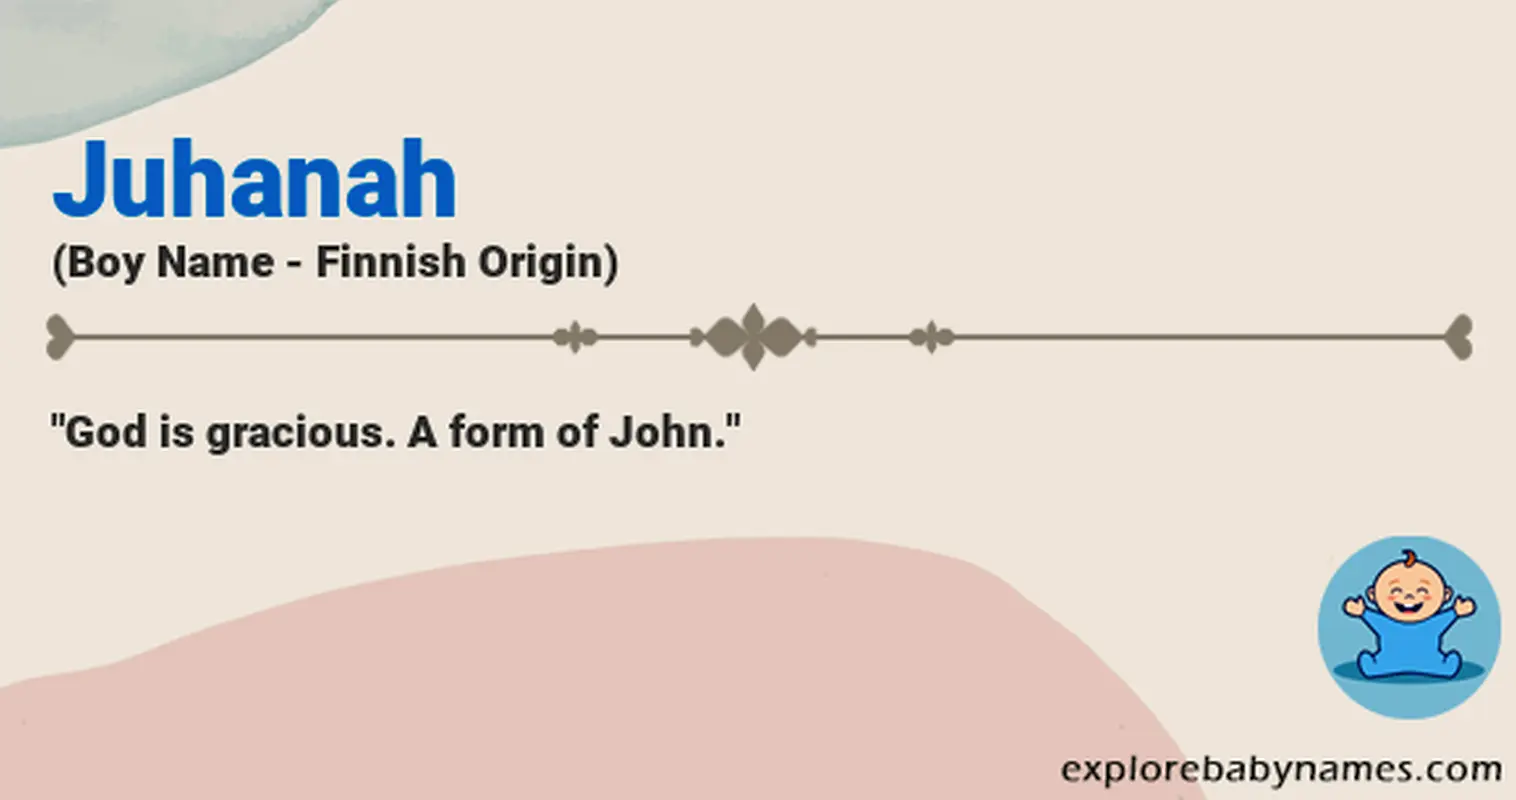 Meaning of Juhanah